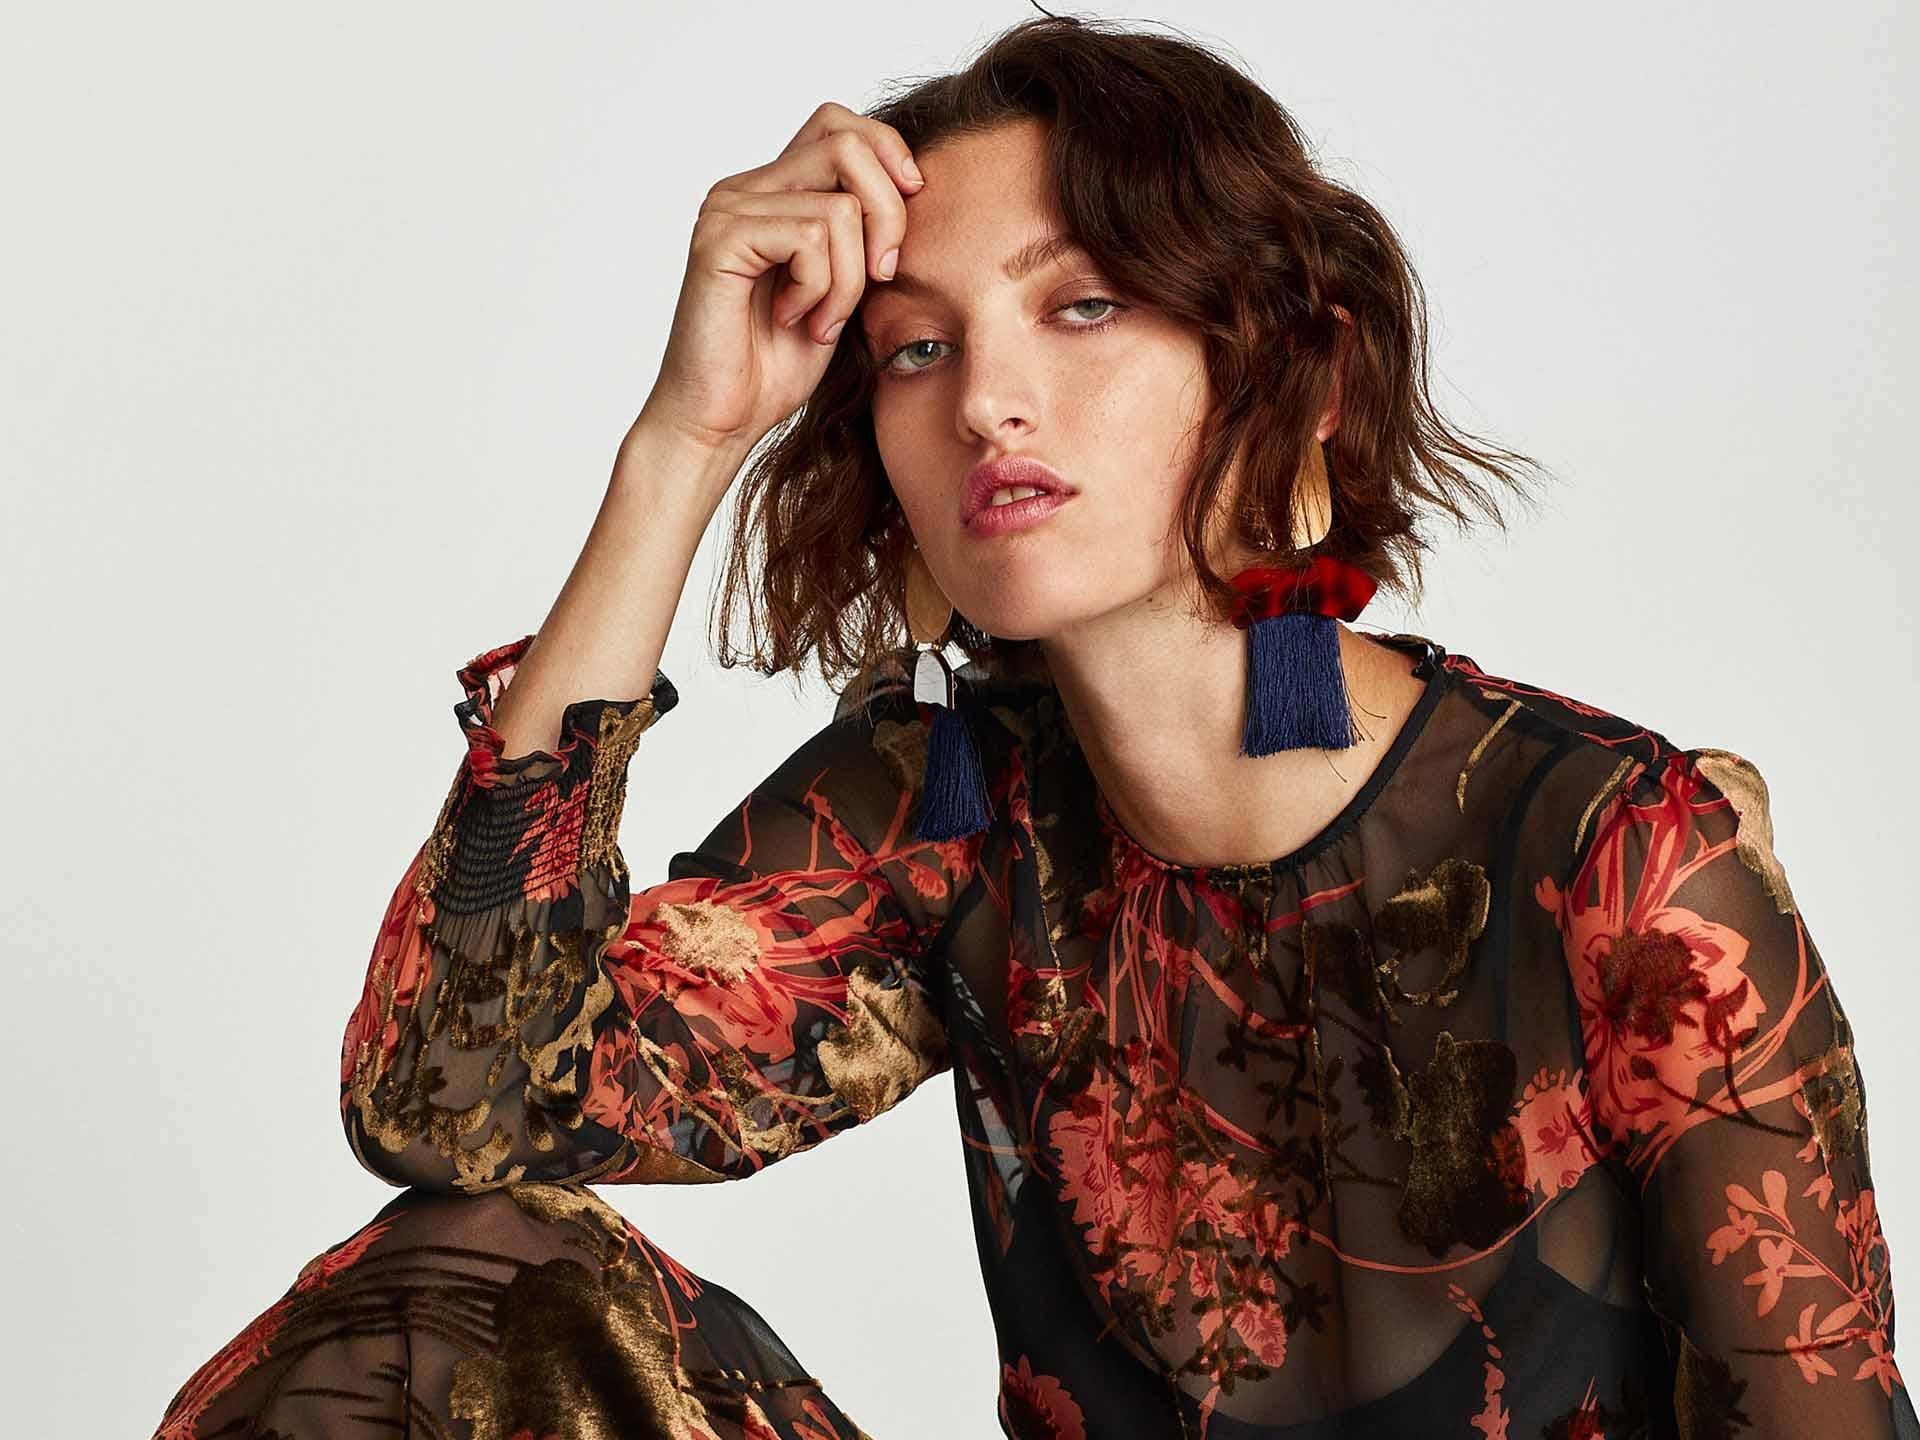 Floral isn’t just for spring, but stick to rich jewel-like colours and thicker fabrics for the damp fall